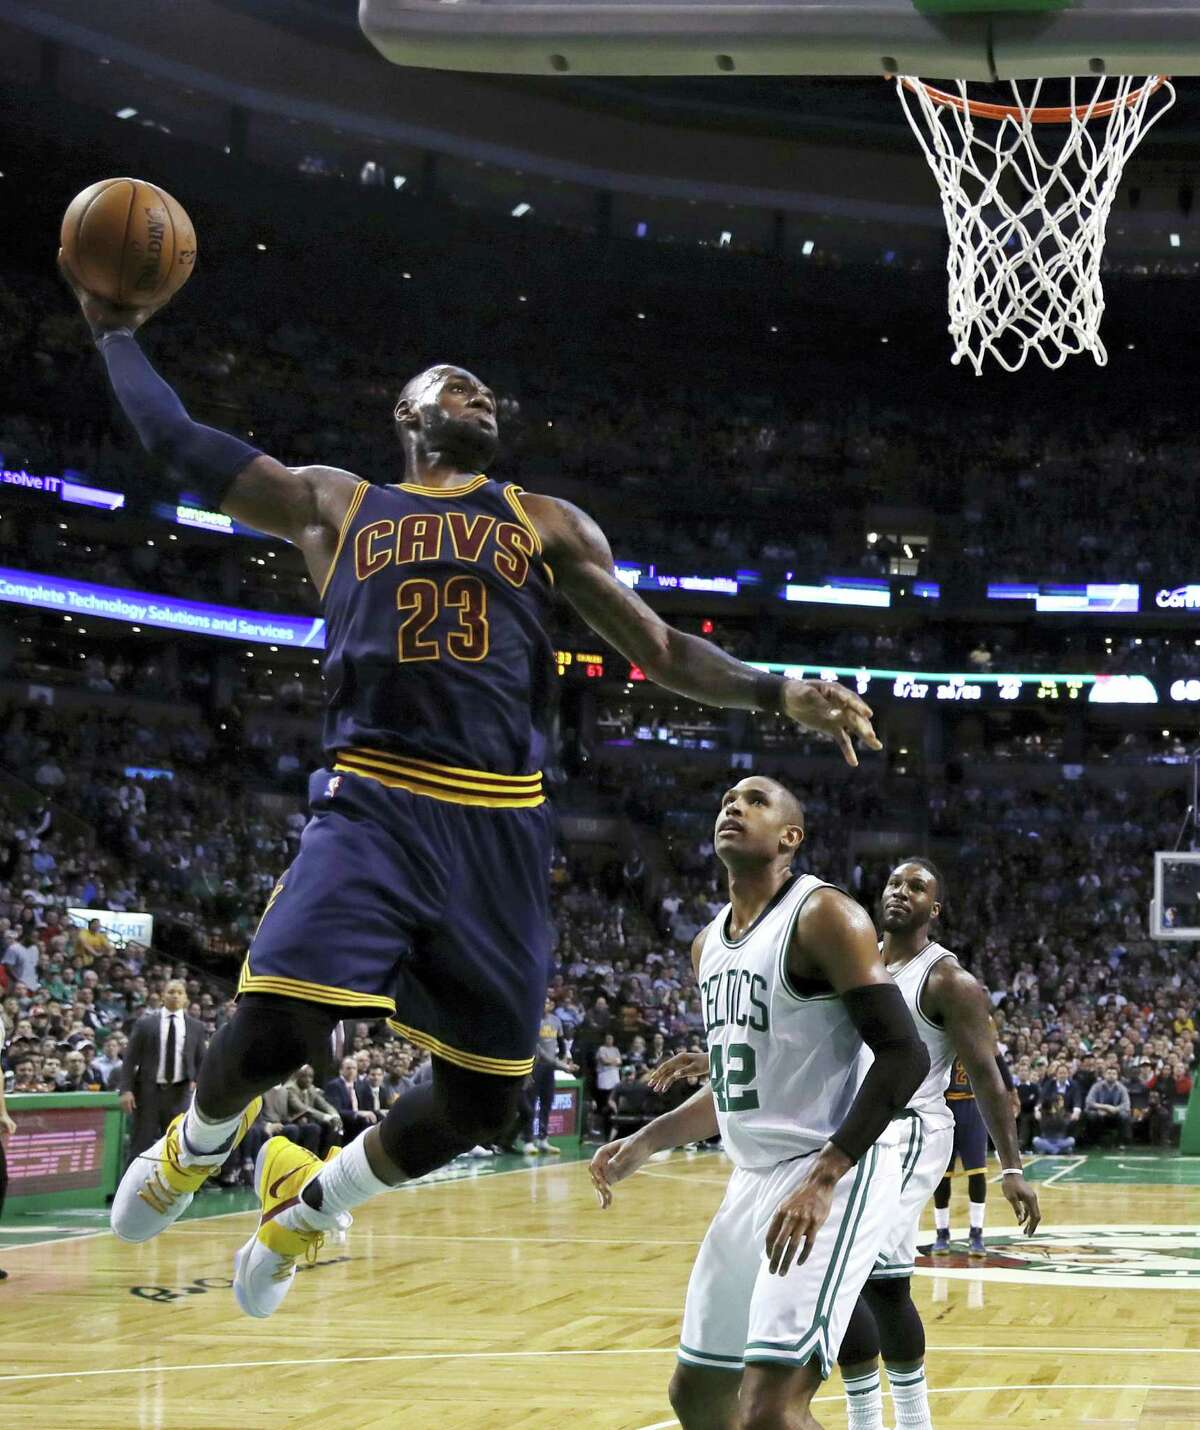 Cleveland Cavaliers forward LeBron James (23) lines up a dunk against Boston Celtics center Al Horford (42) during the third quarter of an NBA basketball game in Boston on March 1, 2017.